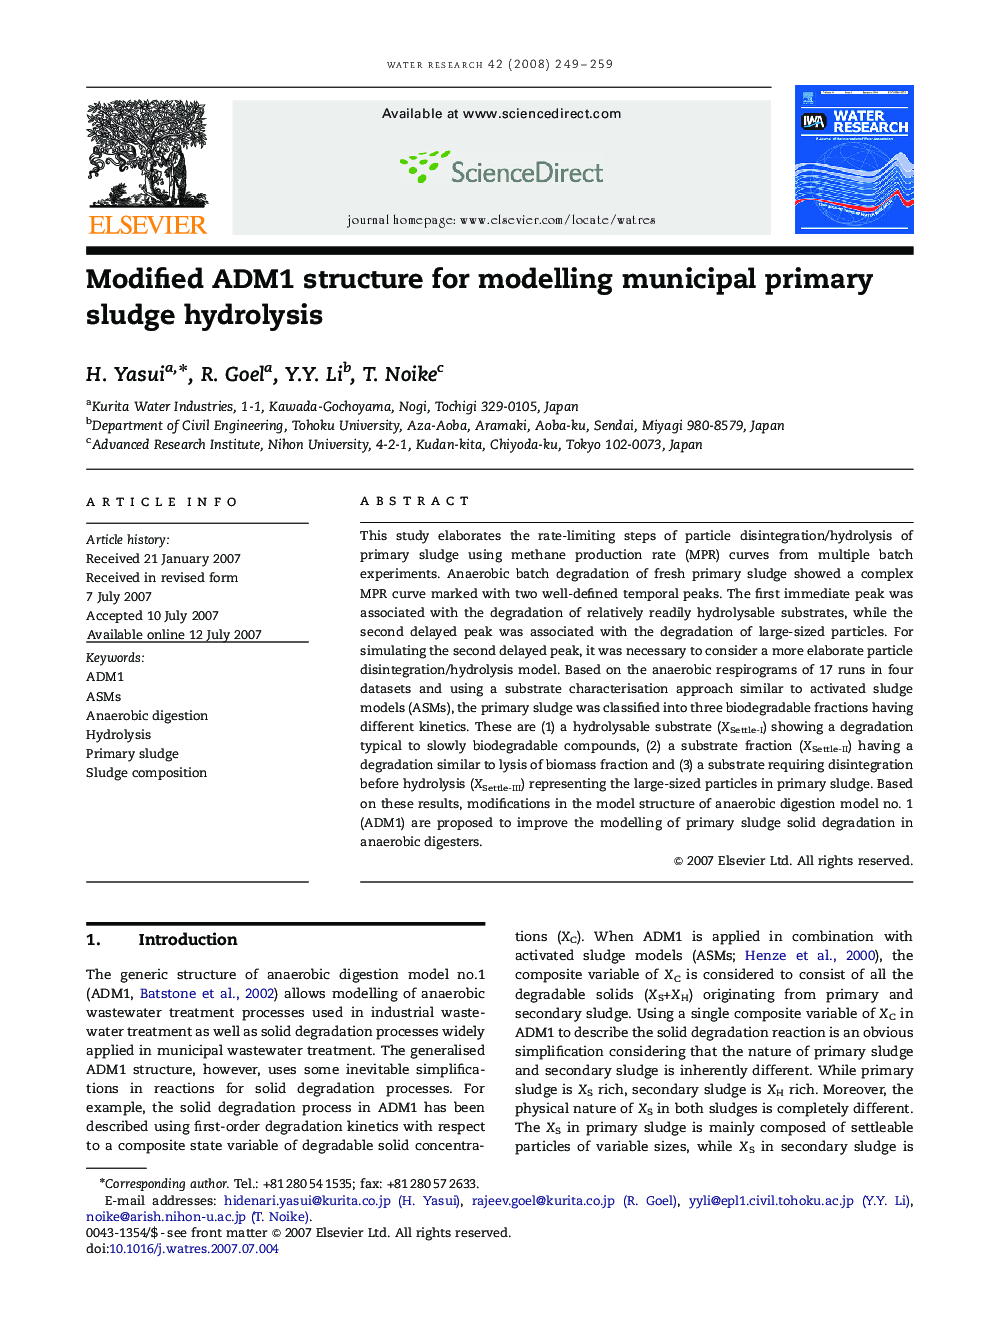 Modified ADM1 structure for modelling municipal primary sludge hydrolysis